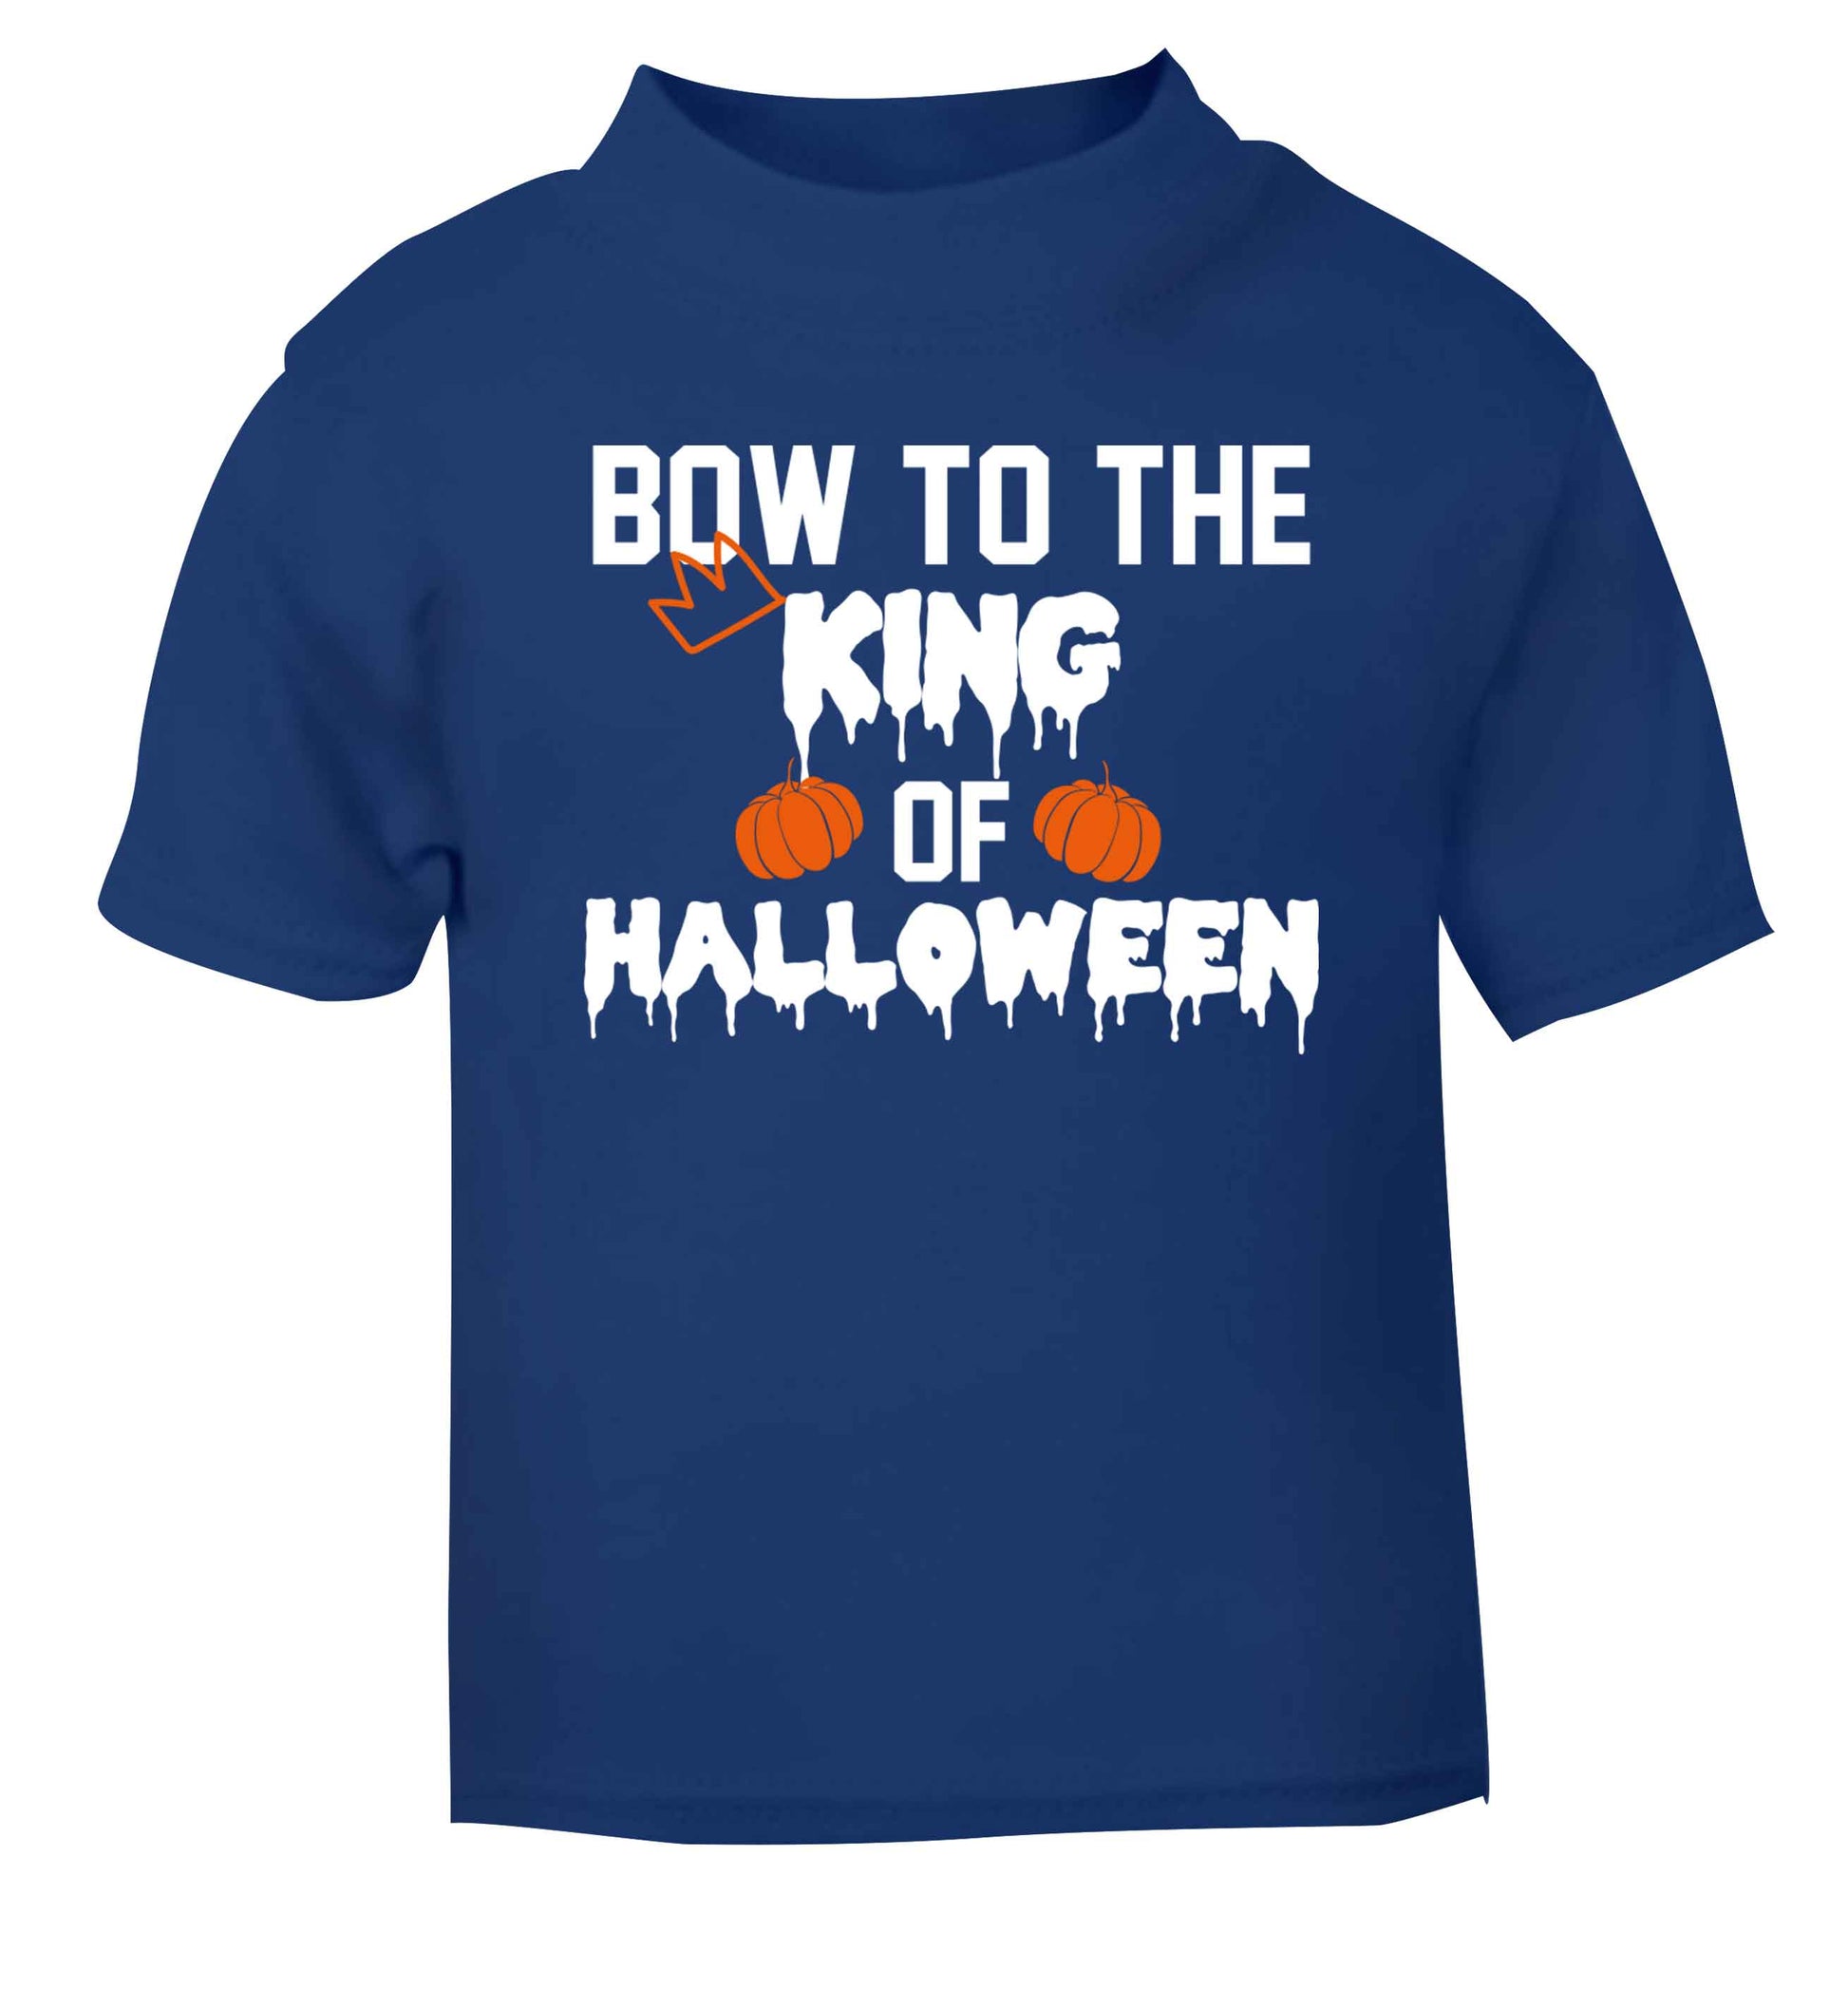 Bow to the King of halloween blue baby toddler Tshirt 2 Years